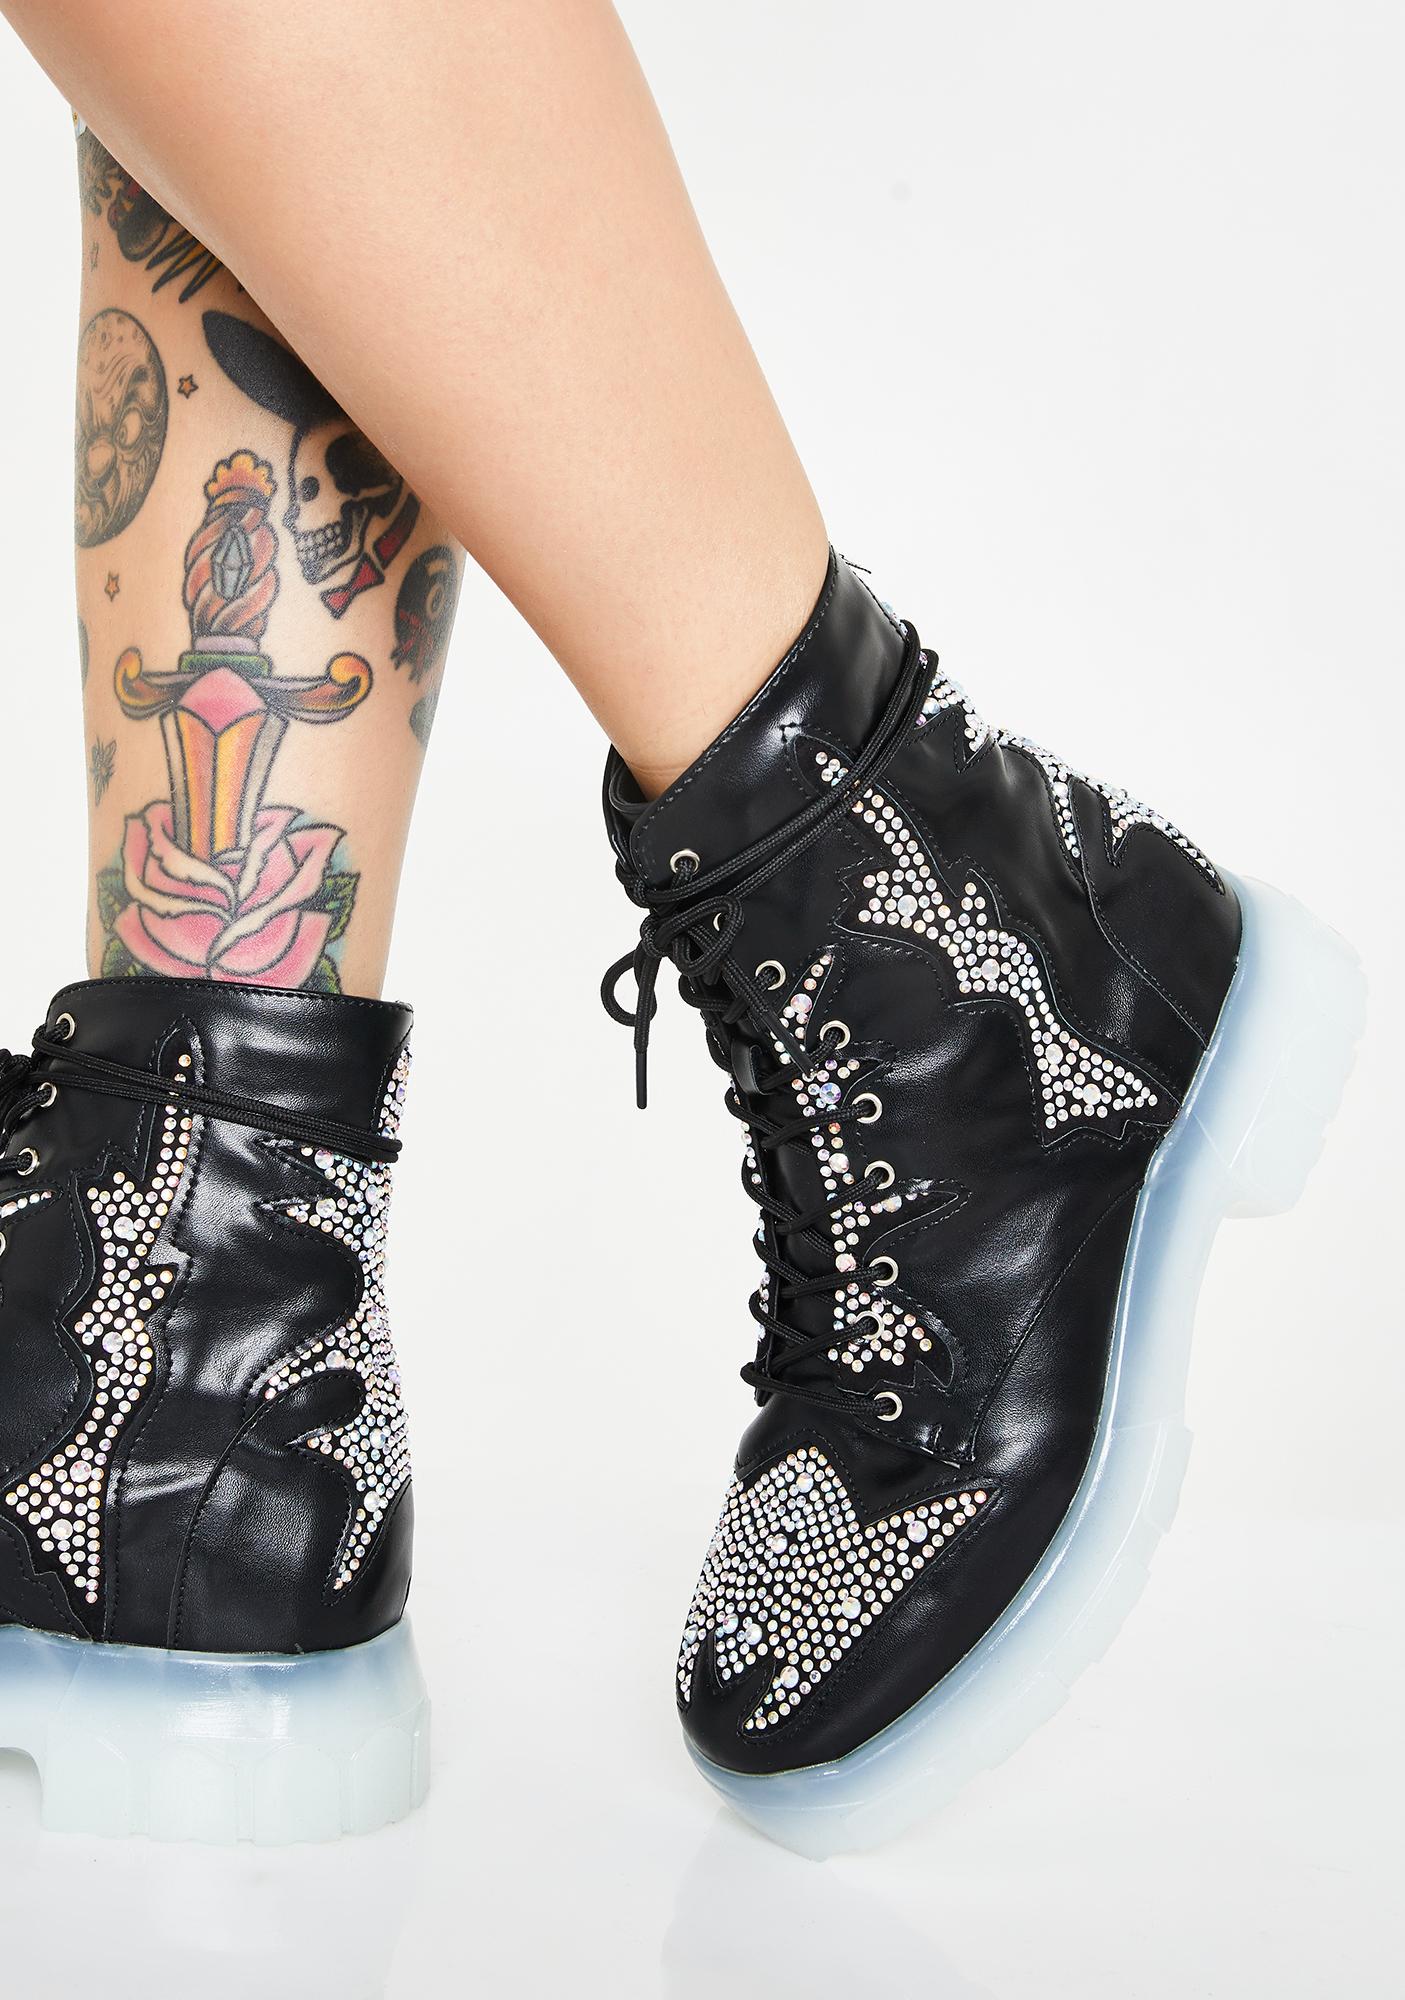 Bedazzled Combat Boots Ankle Rhinestone 